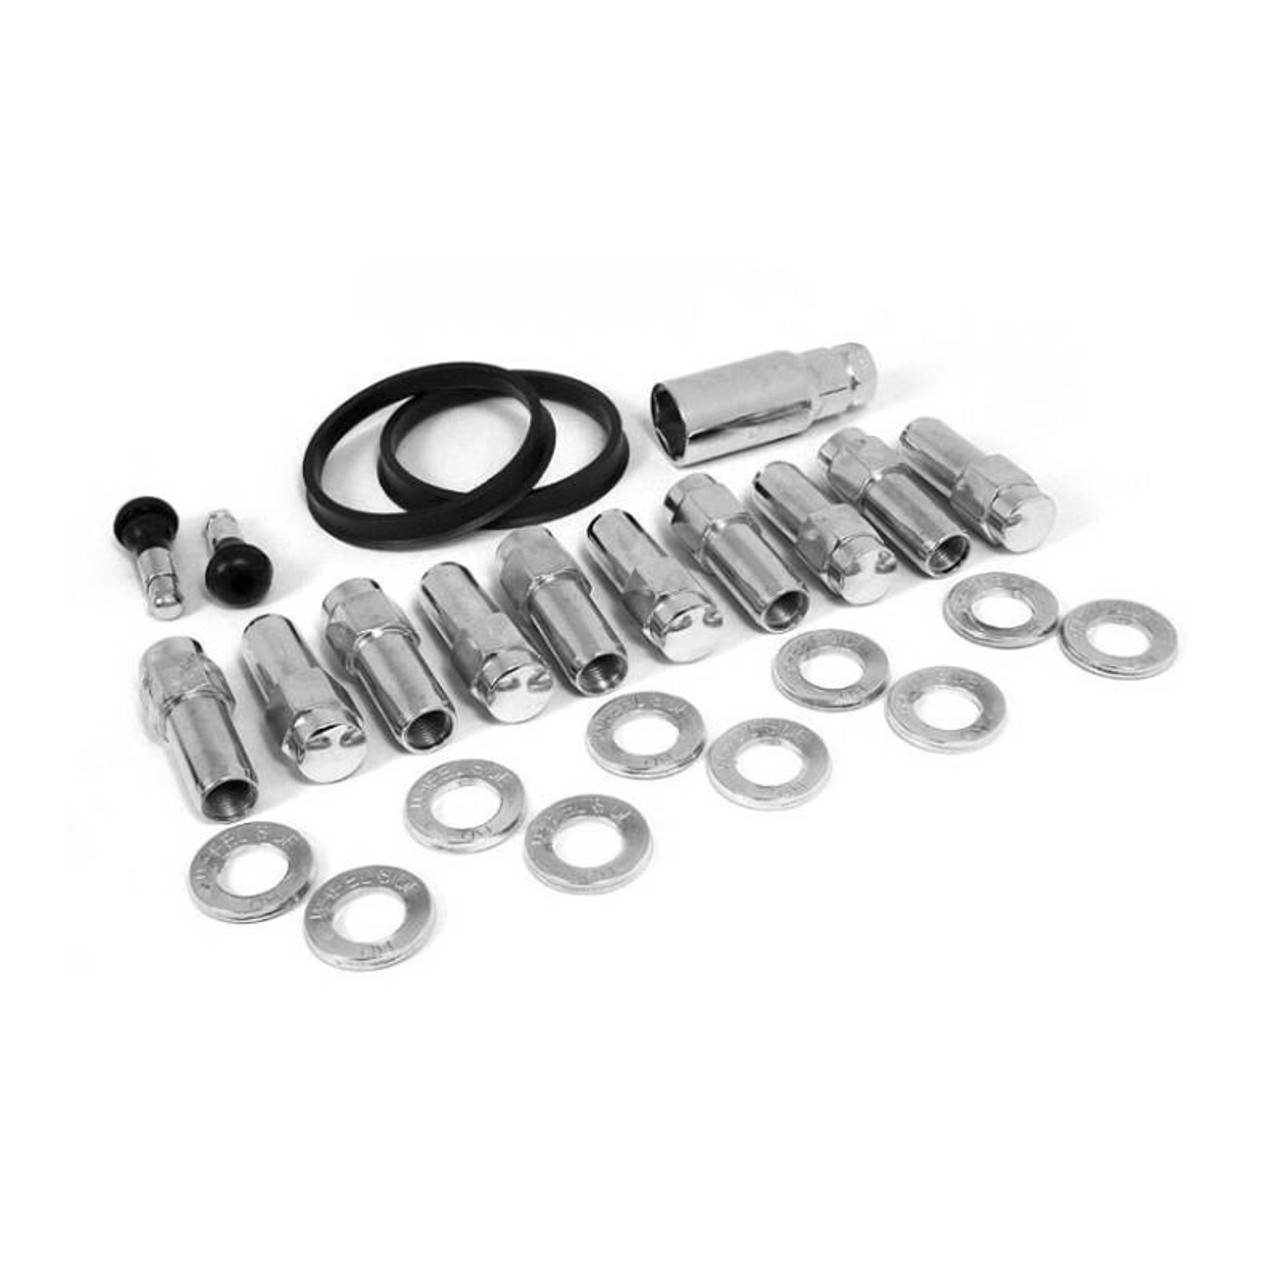 Race Star Race Star 1/2in Ford Closed End Deluxe Lug Kit Direct Drill - 10 PK - 601-1416D-10